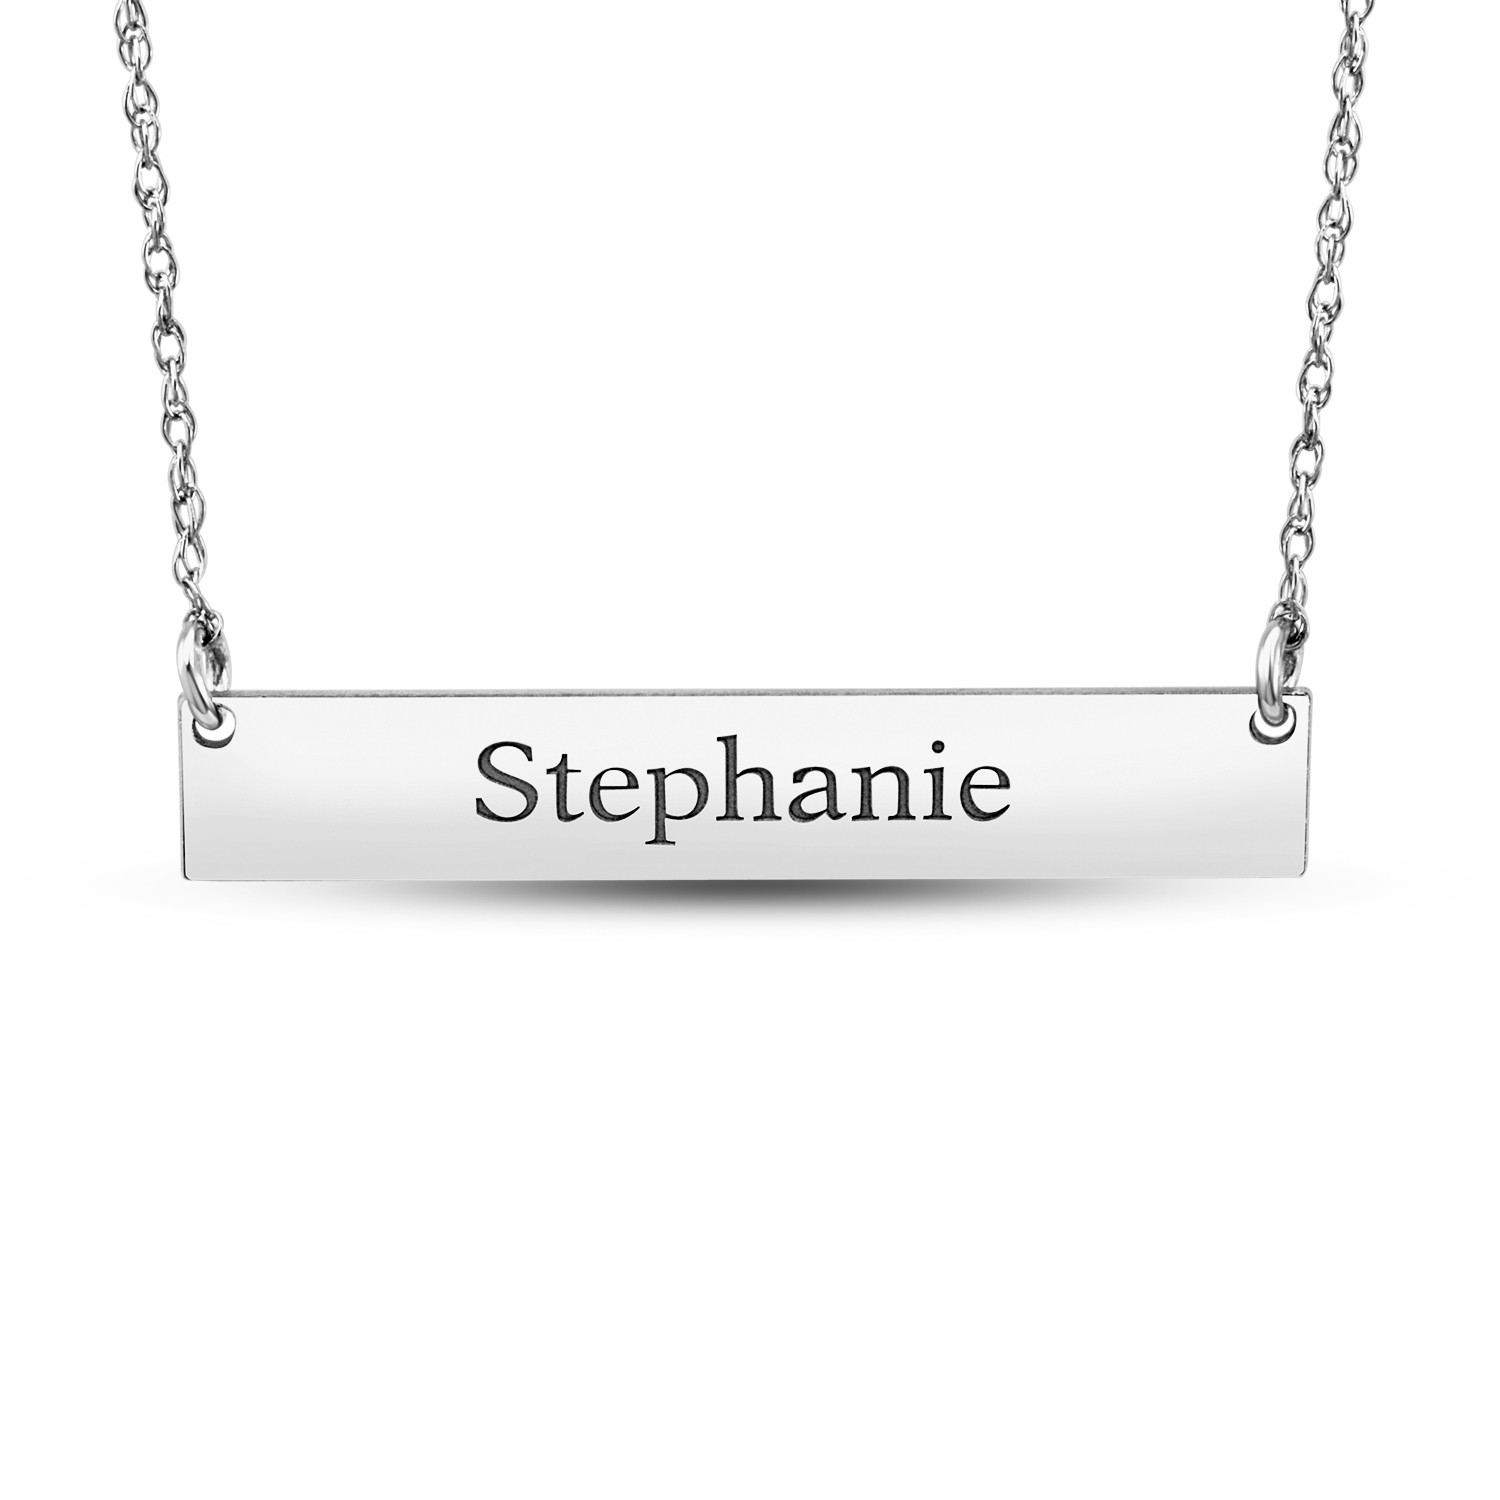 6 x 34mm Hi Polish Bar Pers Necklace - 16 character max, Stephanie 6mm x 34mm